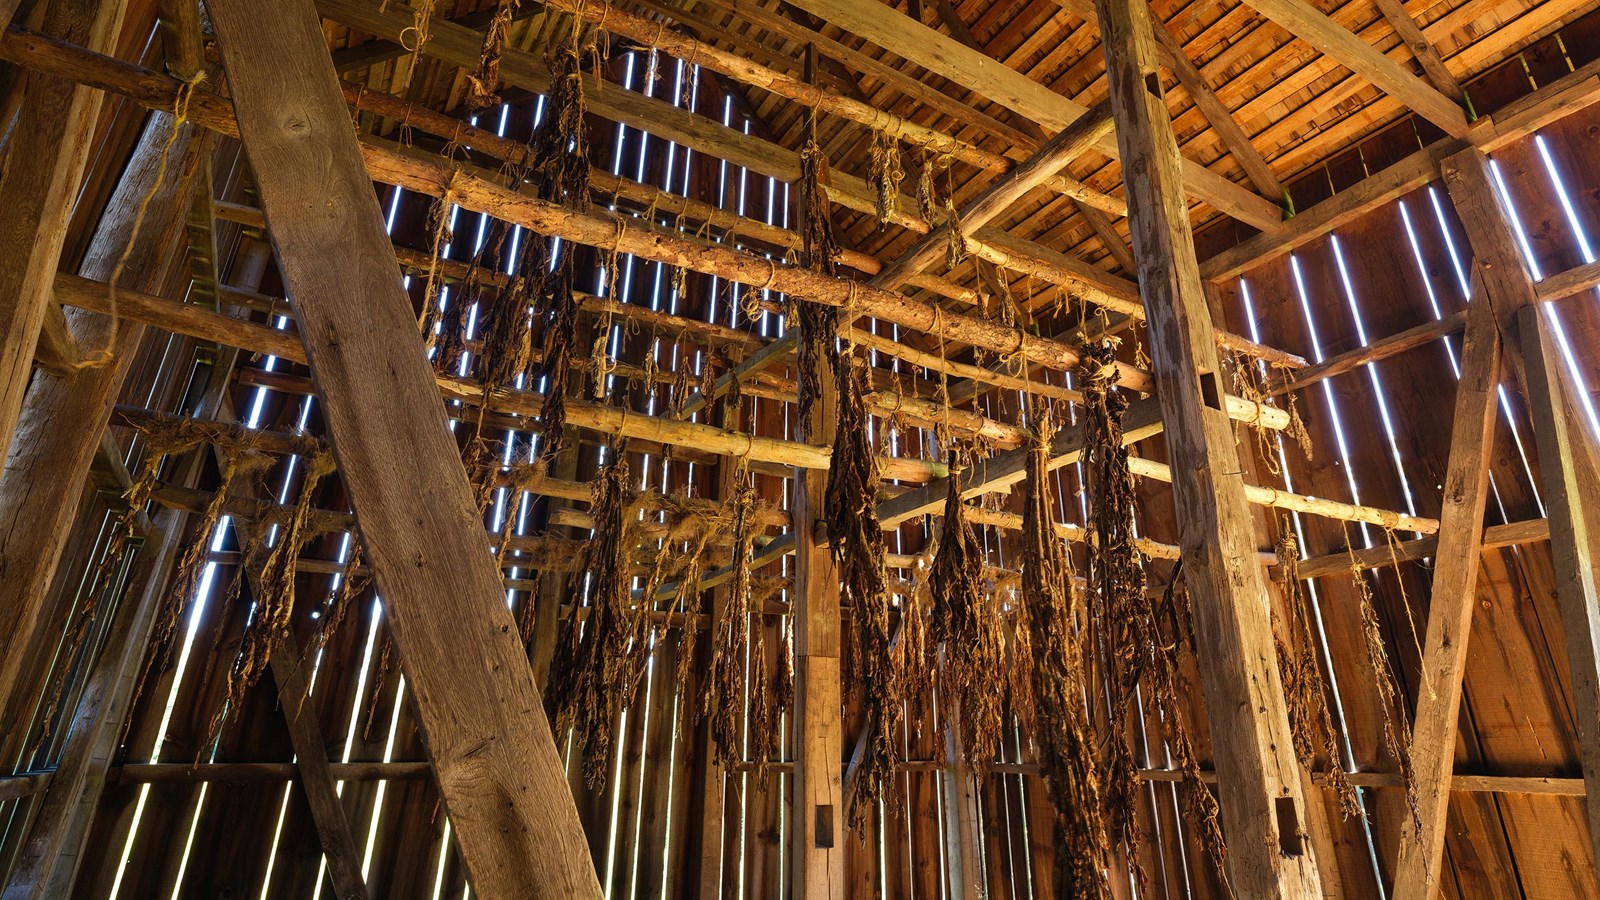 Tobacco barn ceiling with drying tobacco hanging from it